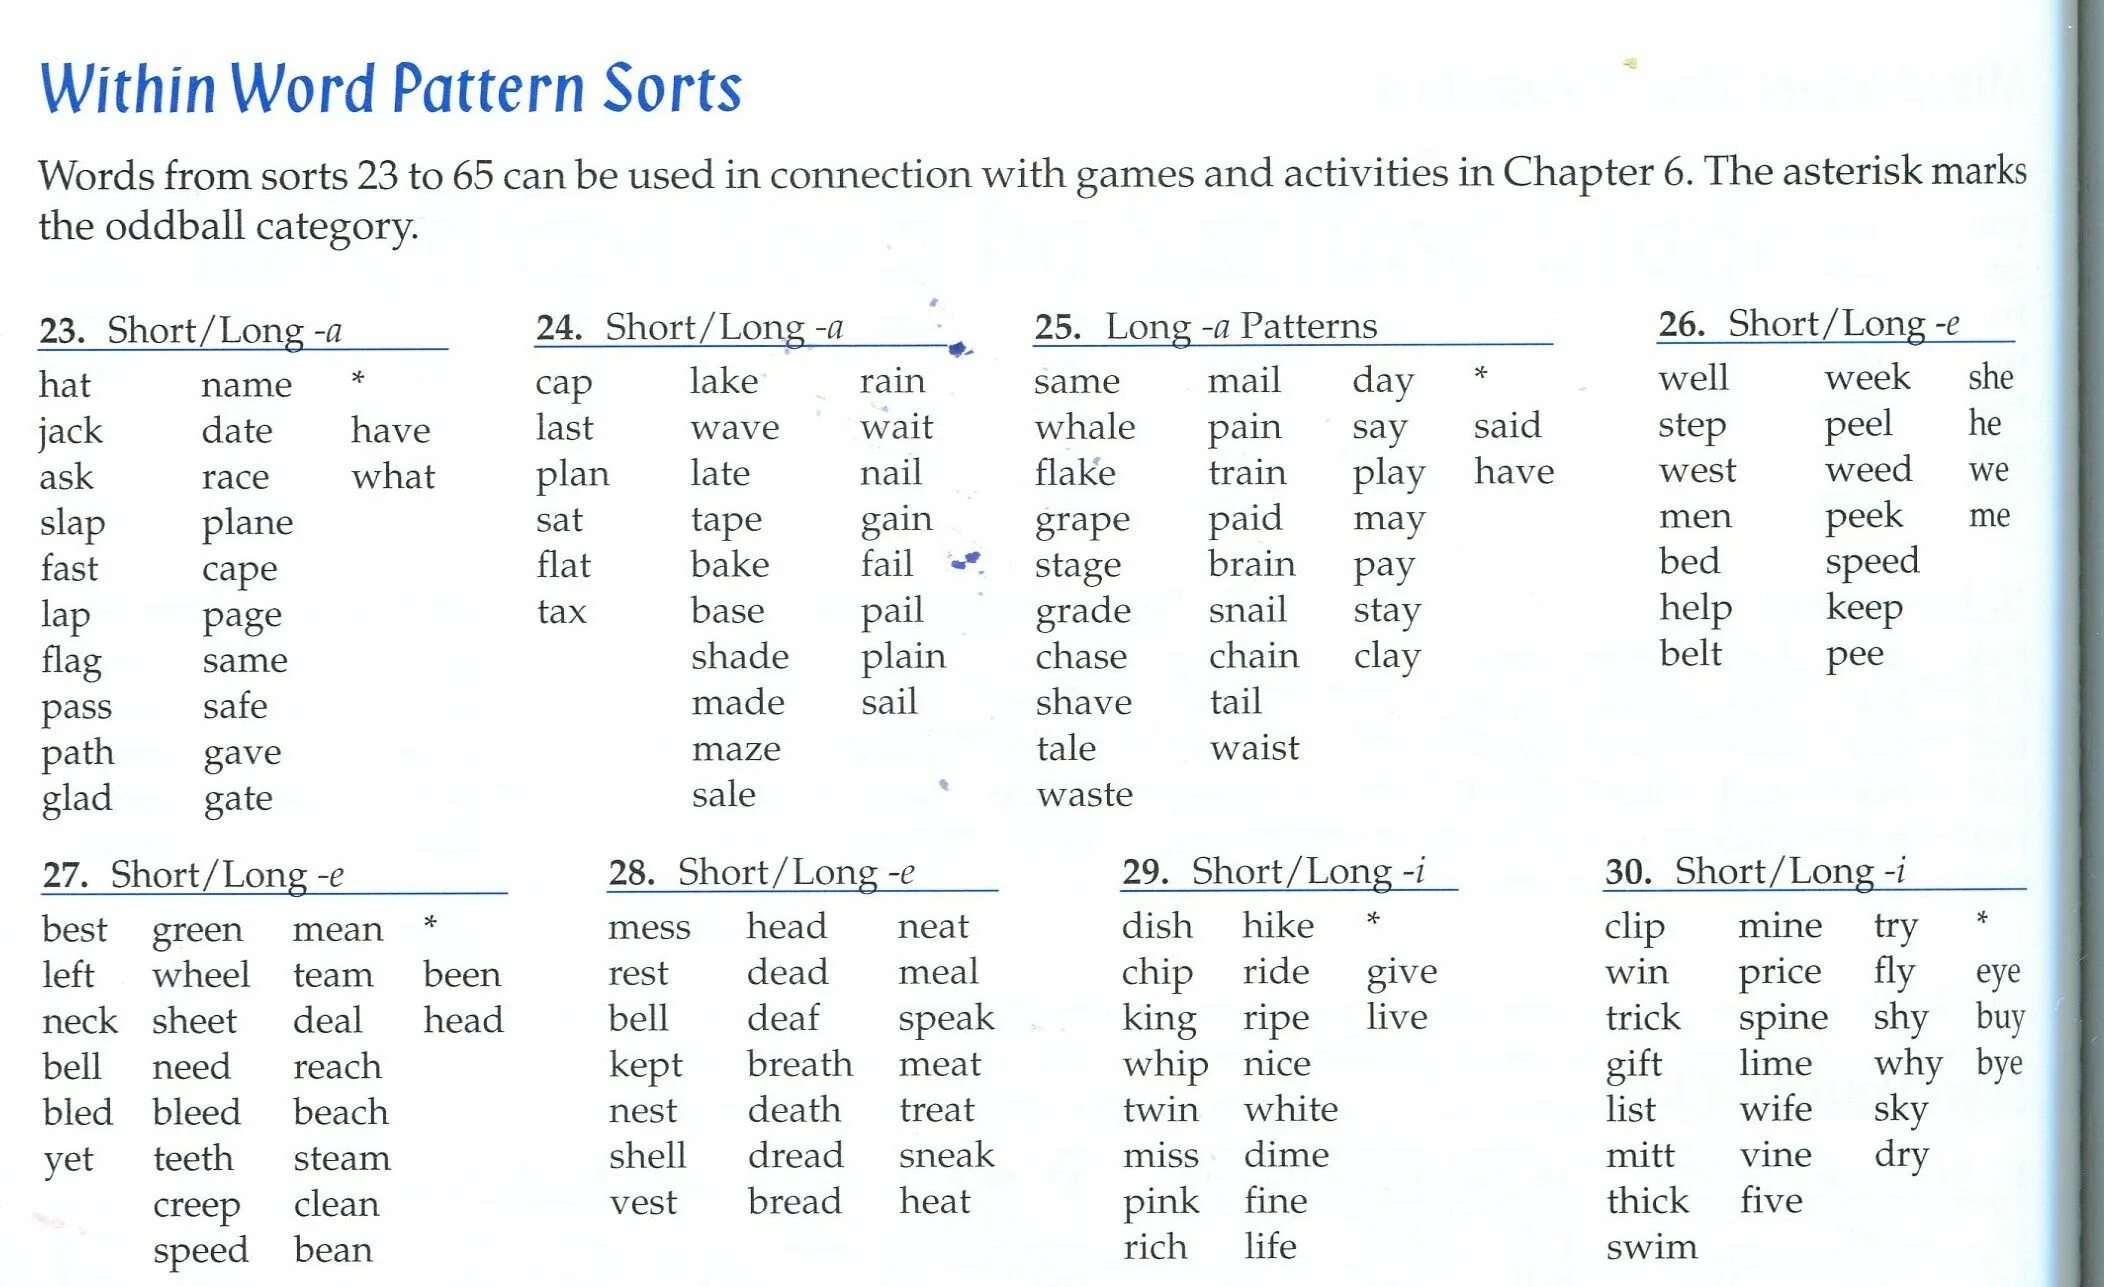 Words within words. Words from Words. Word Chain. Word patterns таблица с переводом. Long и short лист.